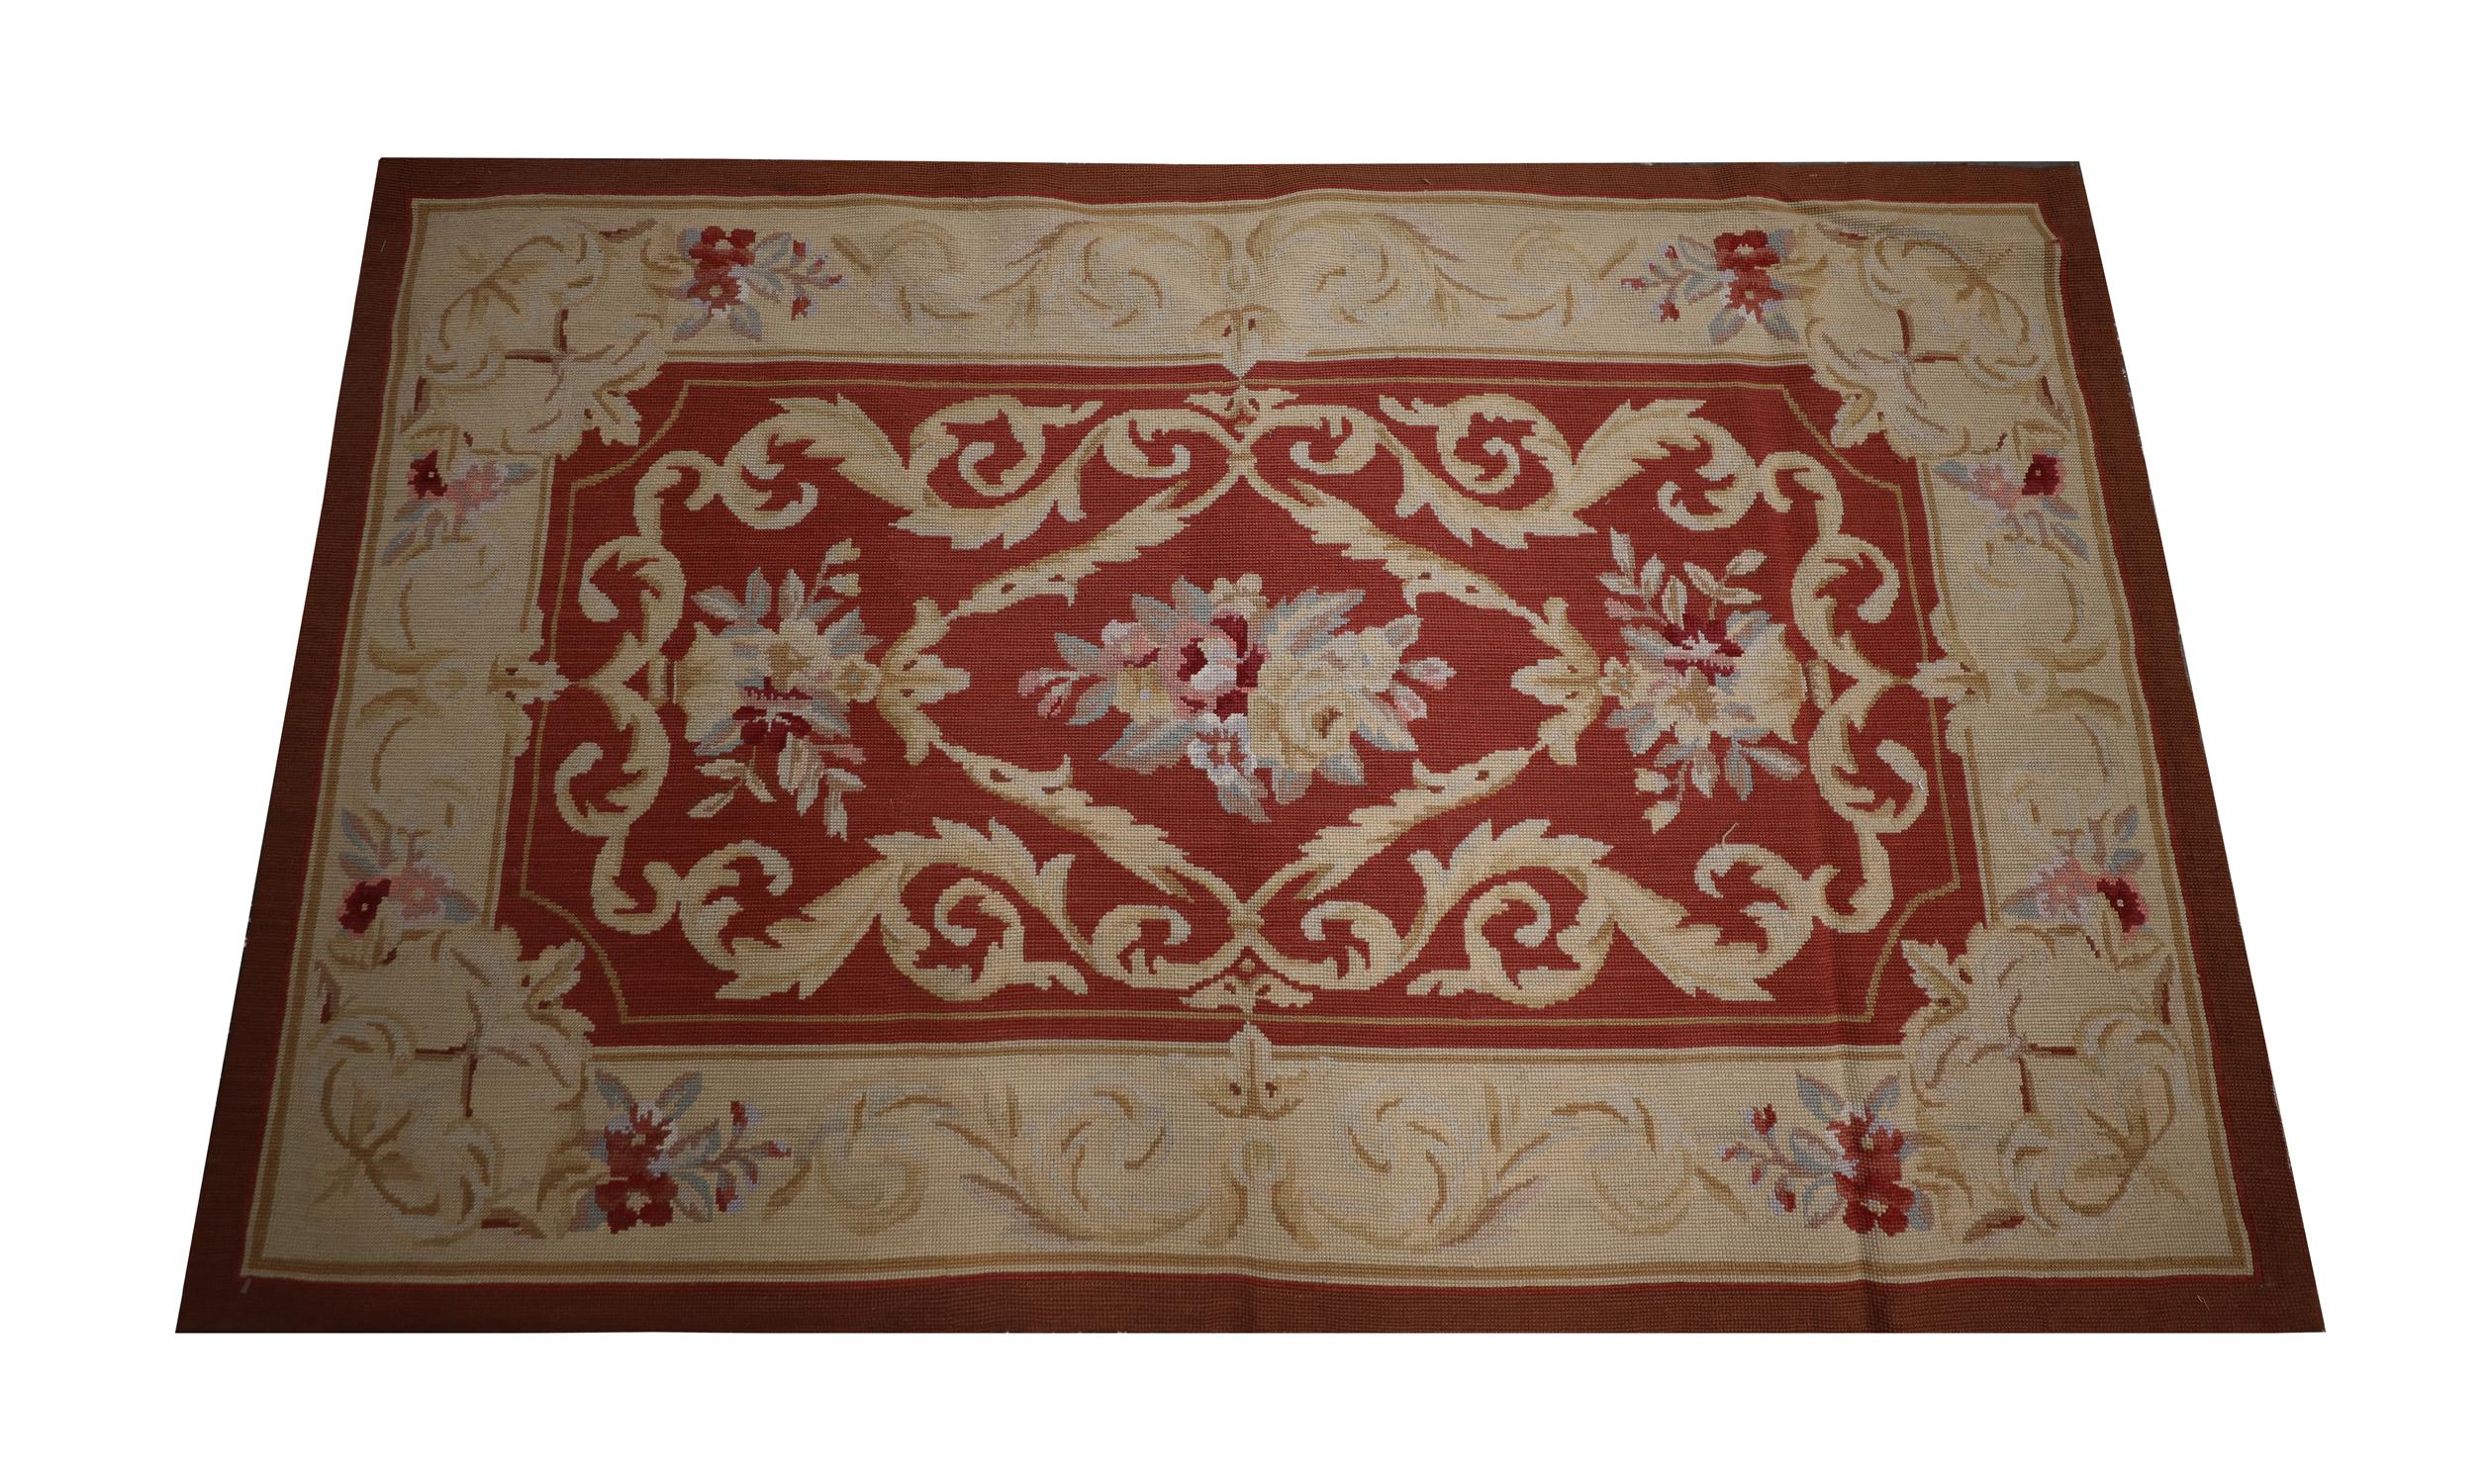 This New English style needlepoint was handwoven in the early 21st century and featured a traditional country house design with a scroll and flower central design and symmetrical surrounding pattern. Woven with an elegant colour palette of deep red,